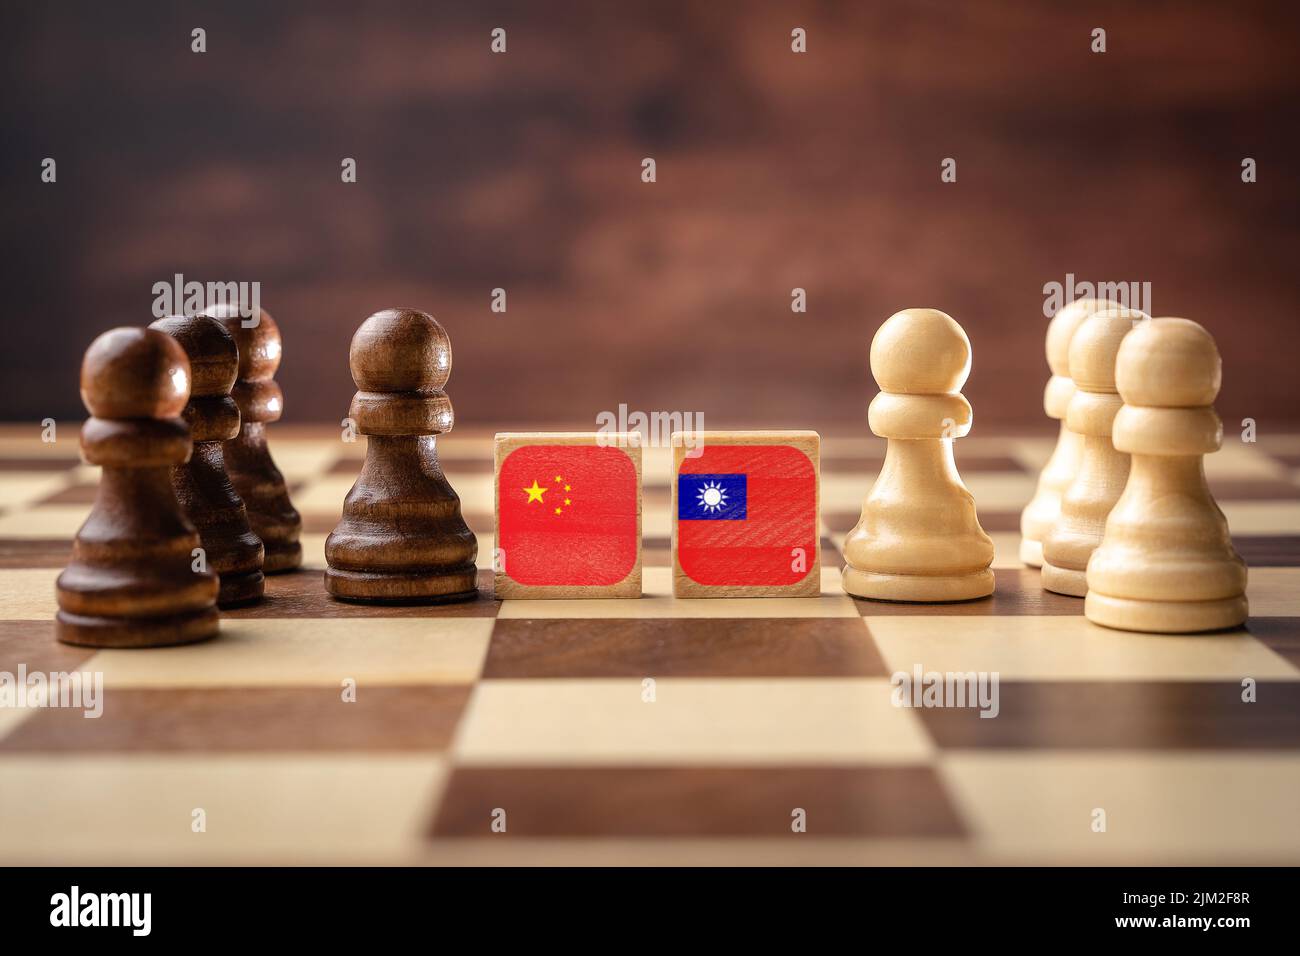 Symbol Image Conflict And War Between The People S Republic Of China And Taiwan PHOTOMONTAGE Stock Photo